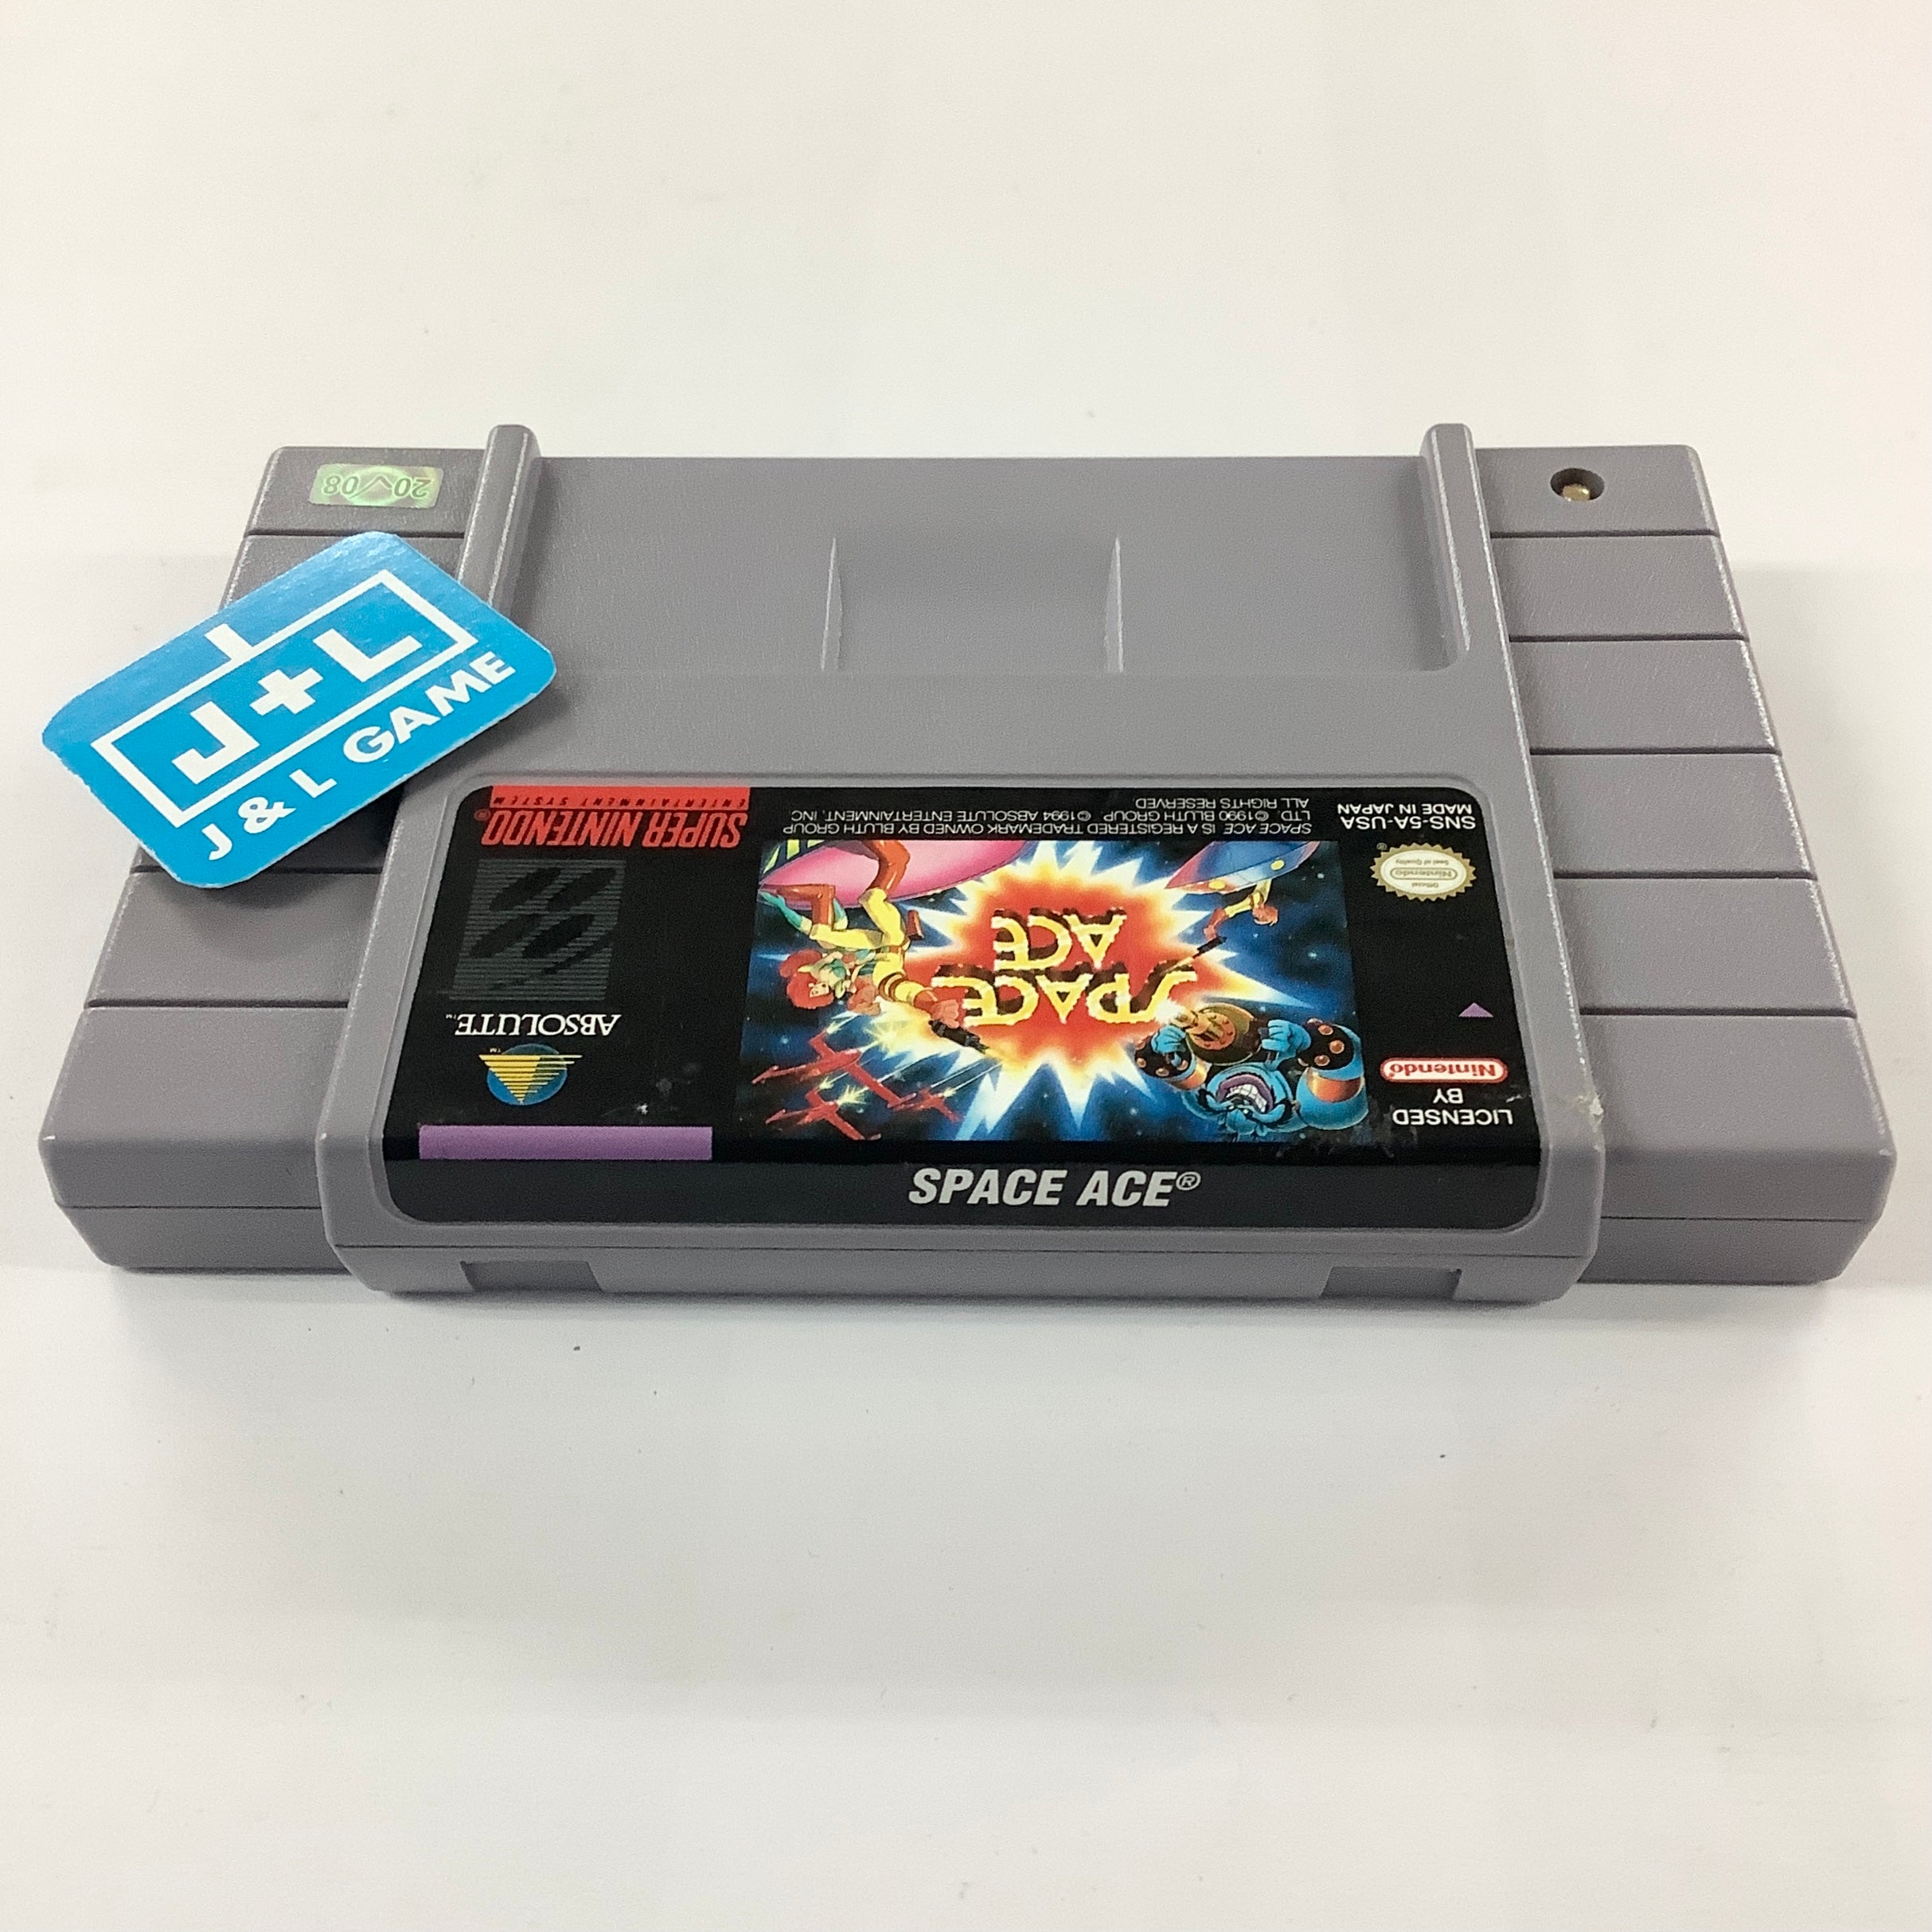 Space Ace - (SNES) Super Nintendo [Pre-Owned] Video Games Absolute Entertainment   